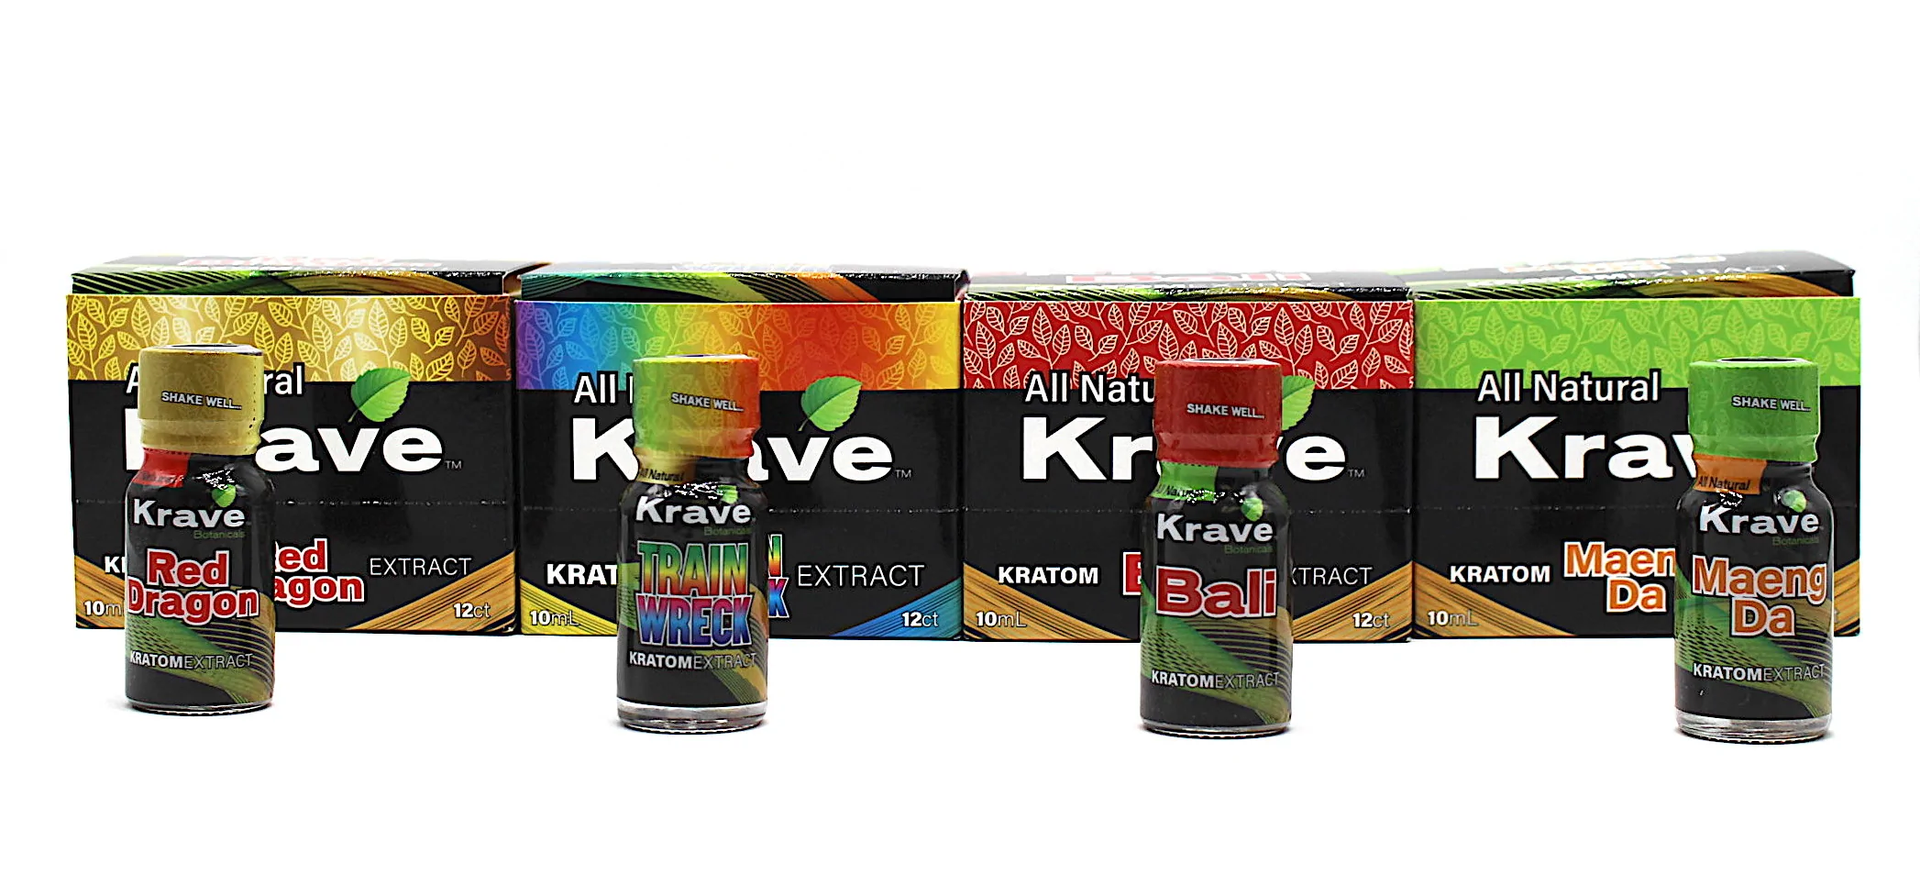 [810059073036] Krave Extract Shot 10ml (Red Dragon)